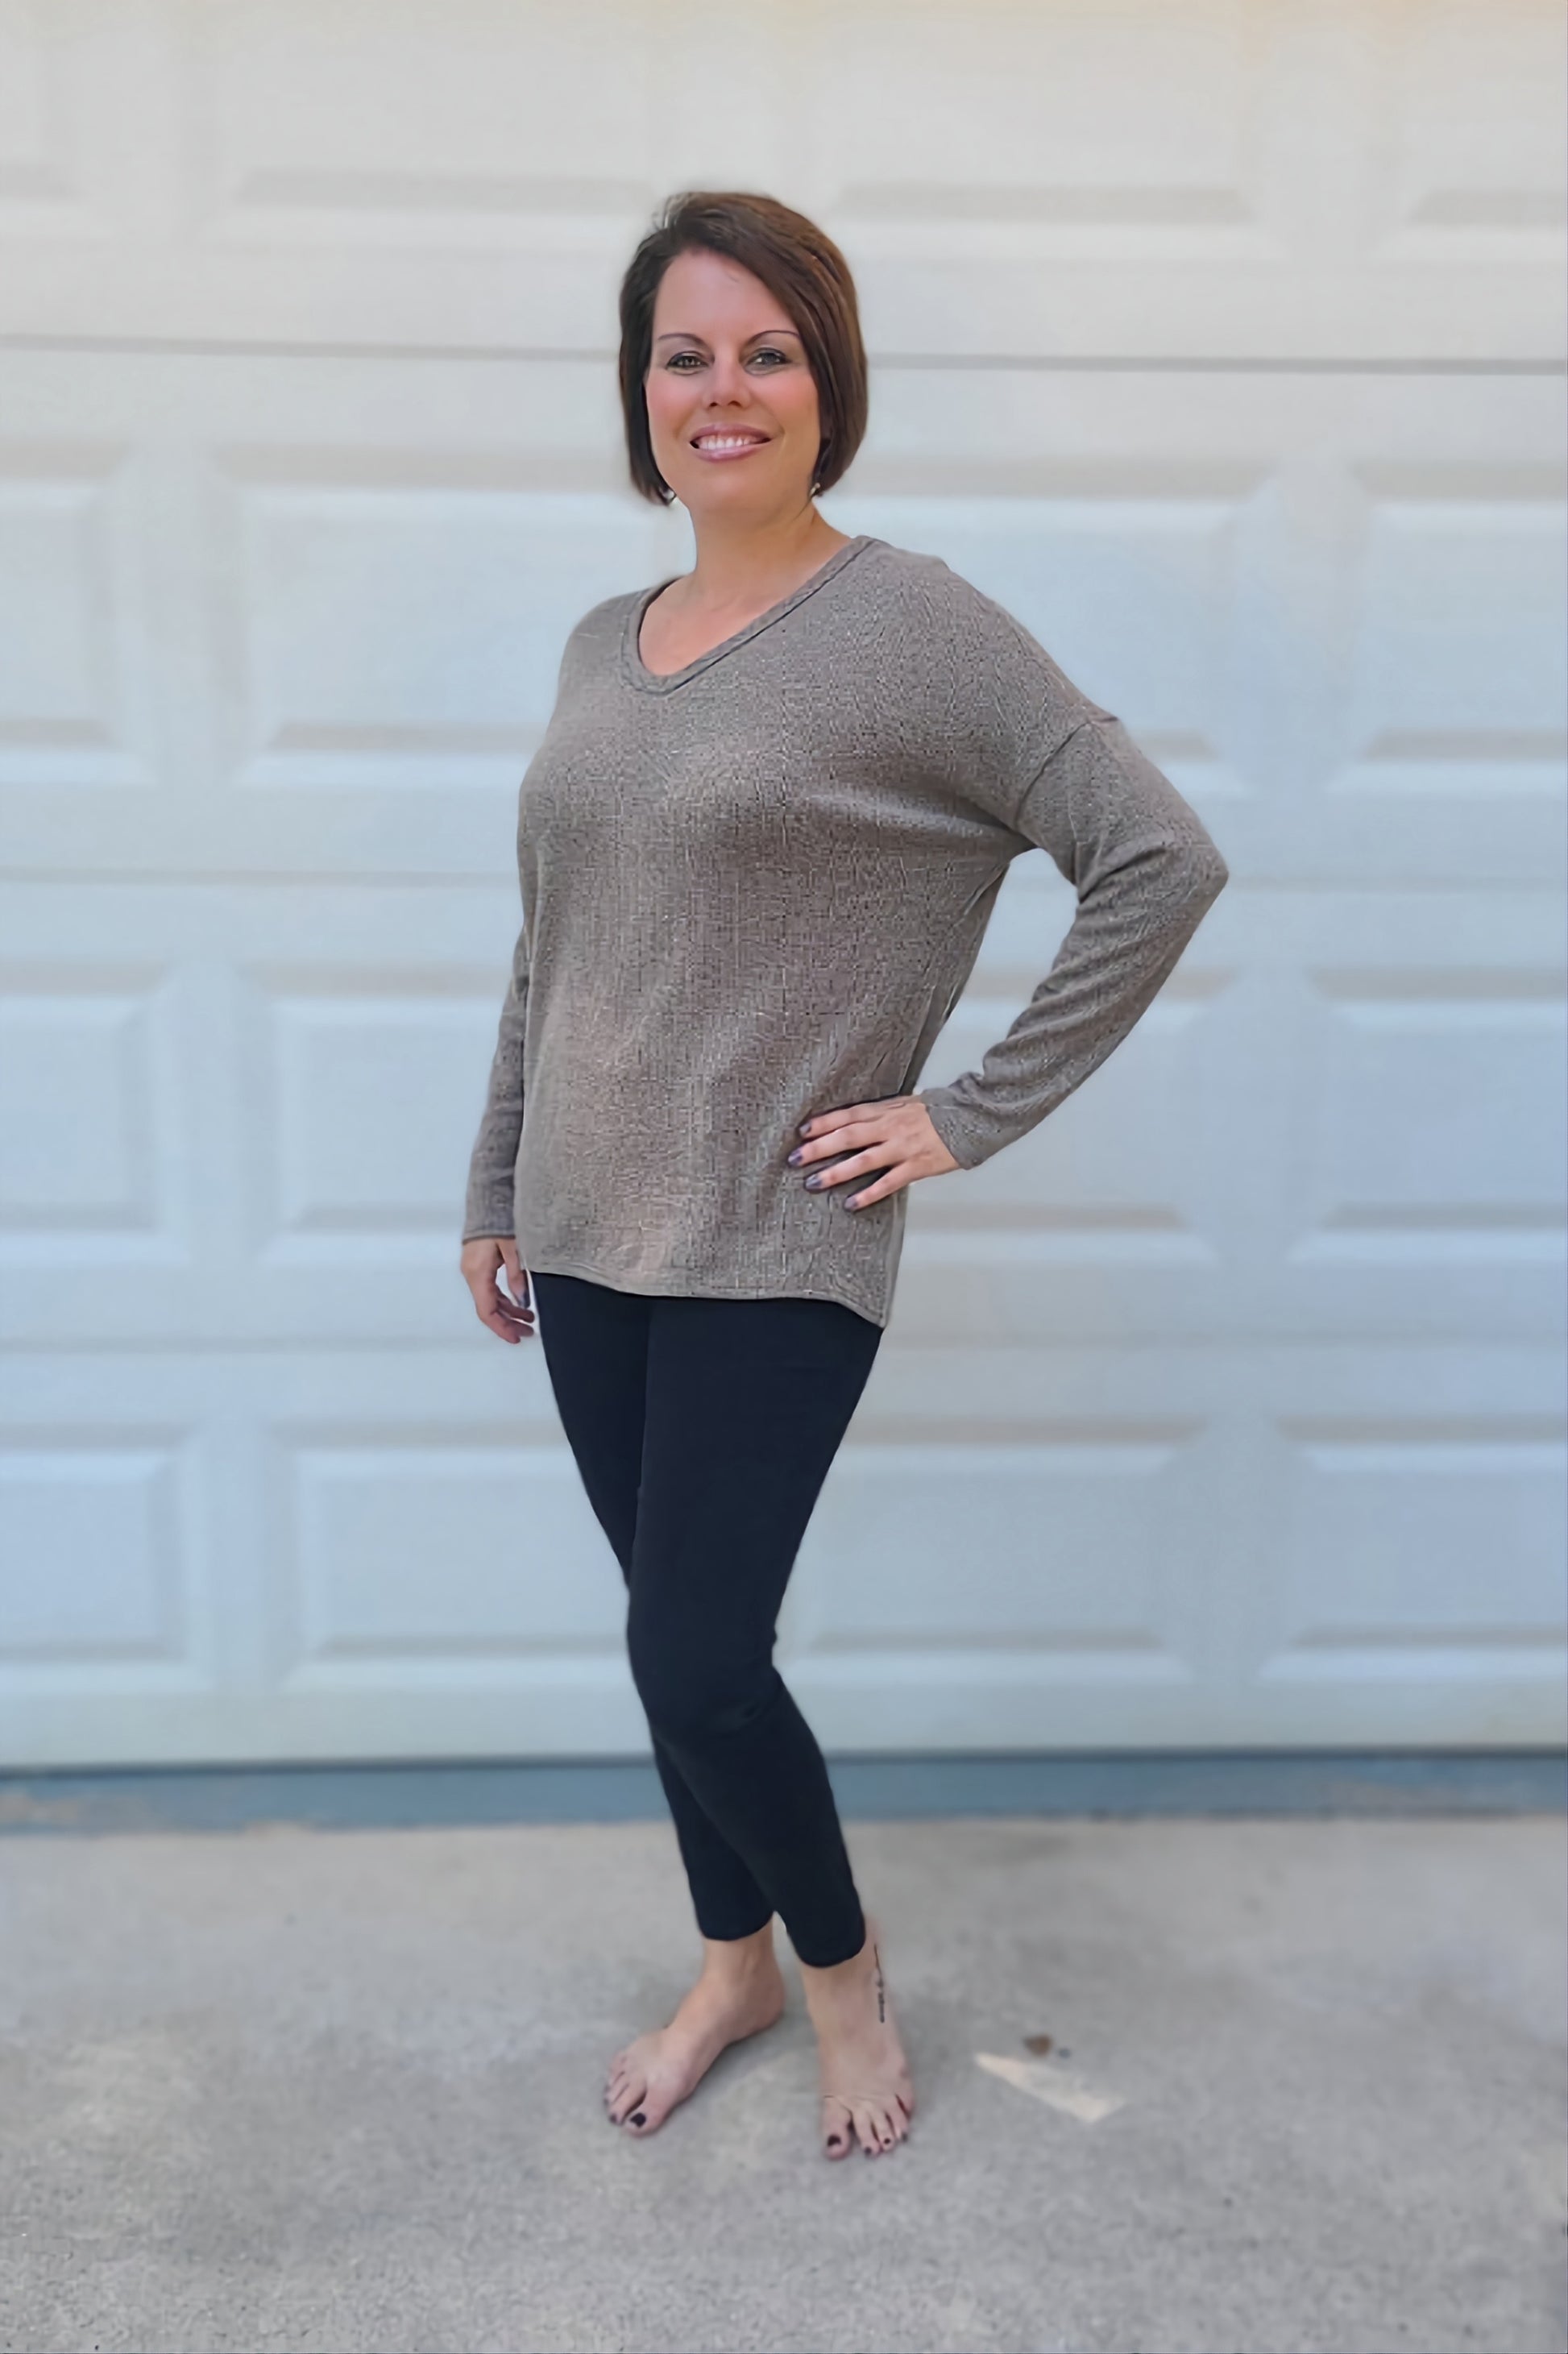 Keep your look casual with this everyday lightweight sweater! You’ll add some simple style to your day with details like a v-neckline, dropped shoulder, dolman sleeves, and it is so soft and comfortable.